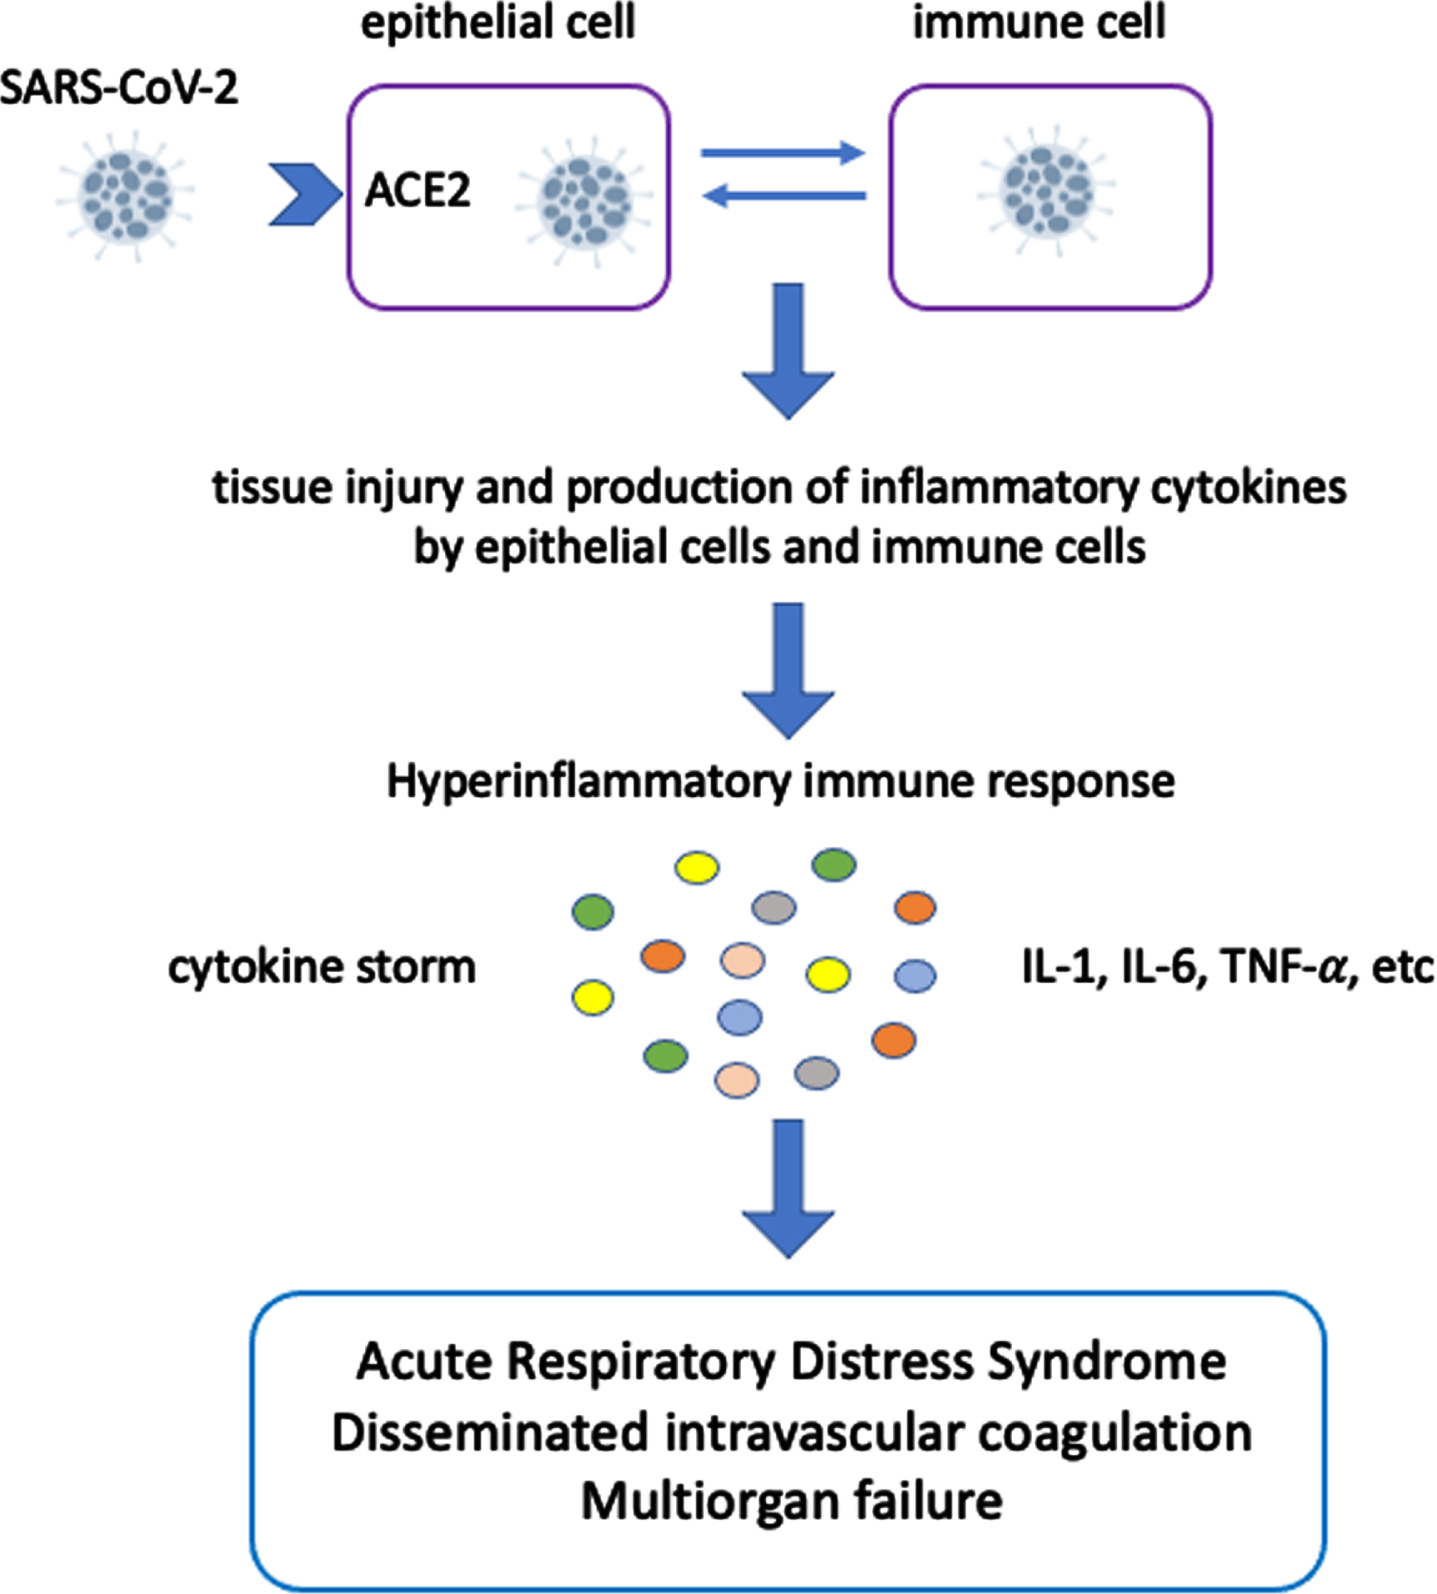 Cytokine storm and its consequences in COVID-19.